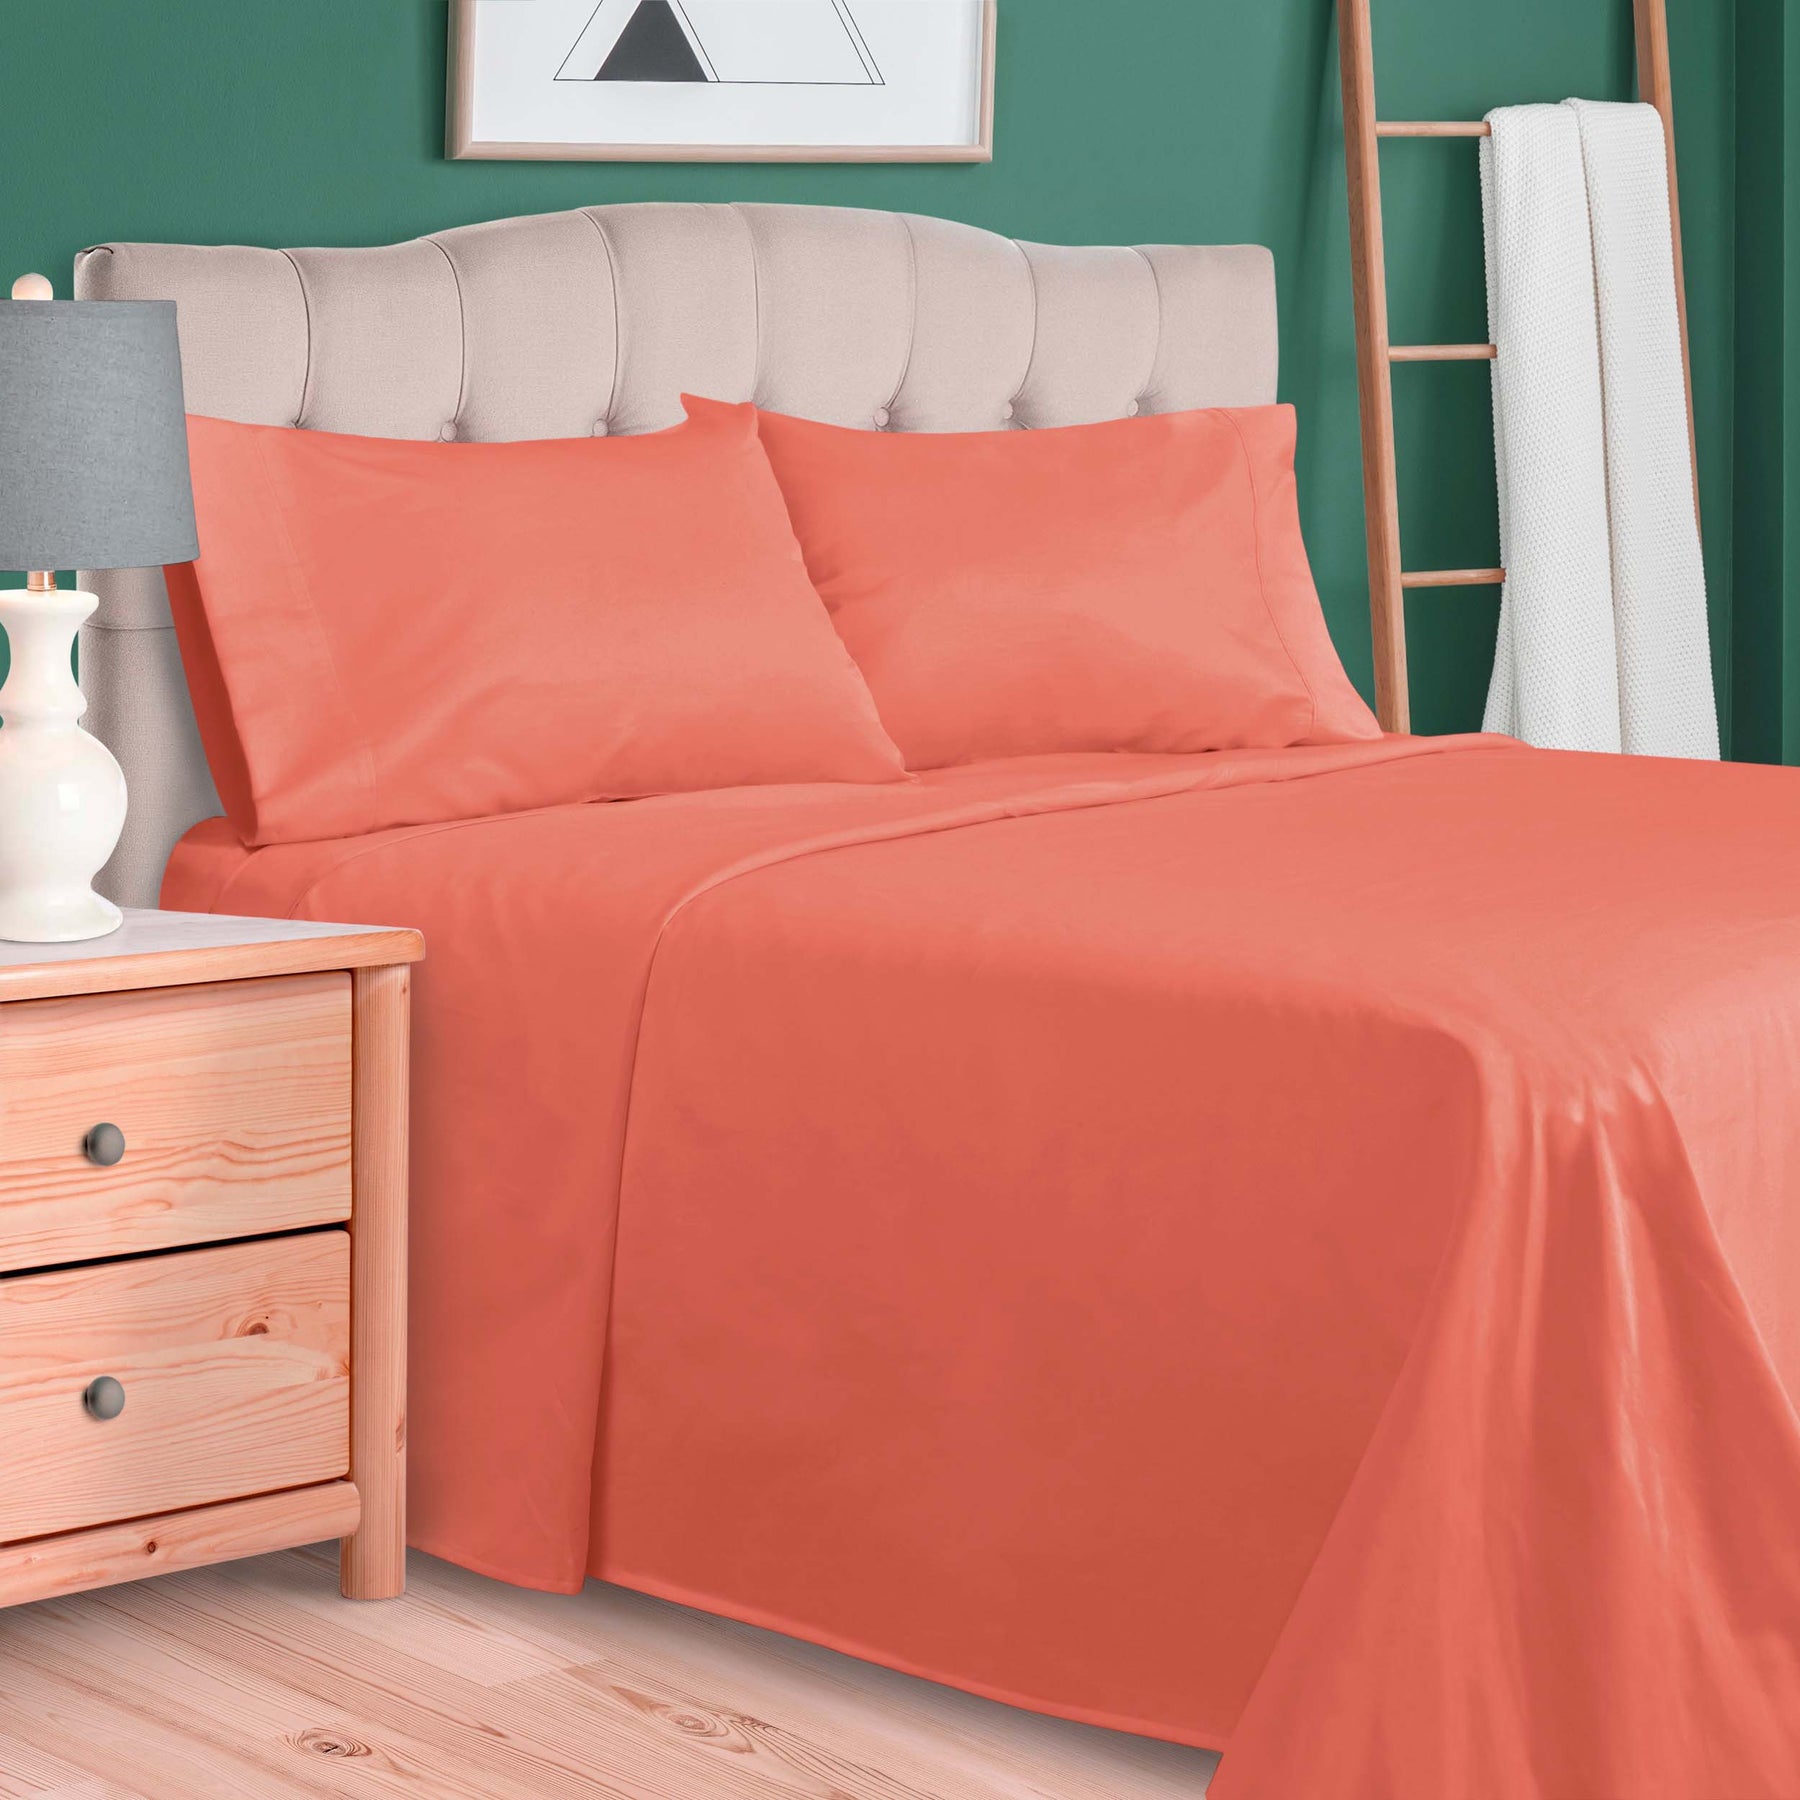 Egyptian Cotton 700 Thread Count Eco Friendly Solid Sheet Set - Coral